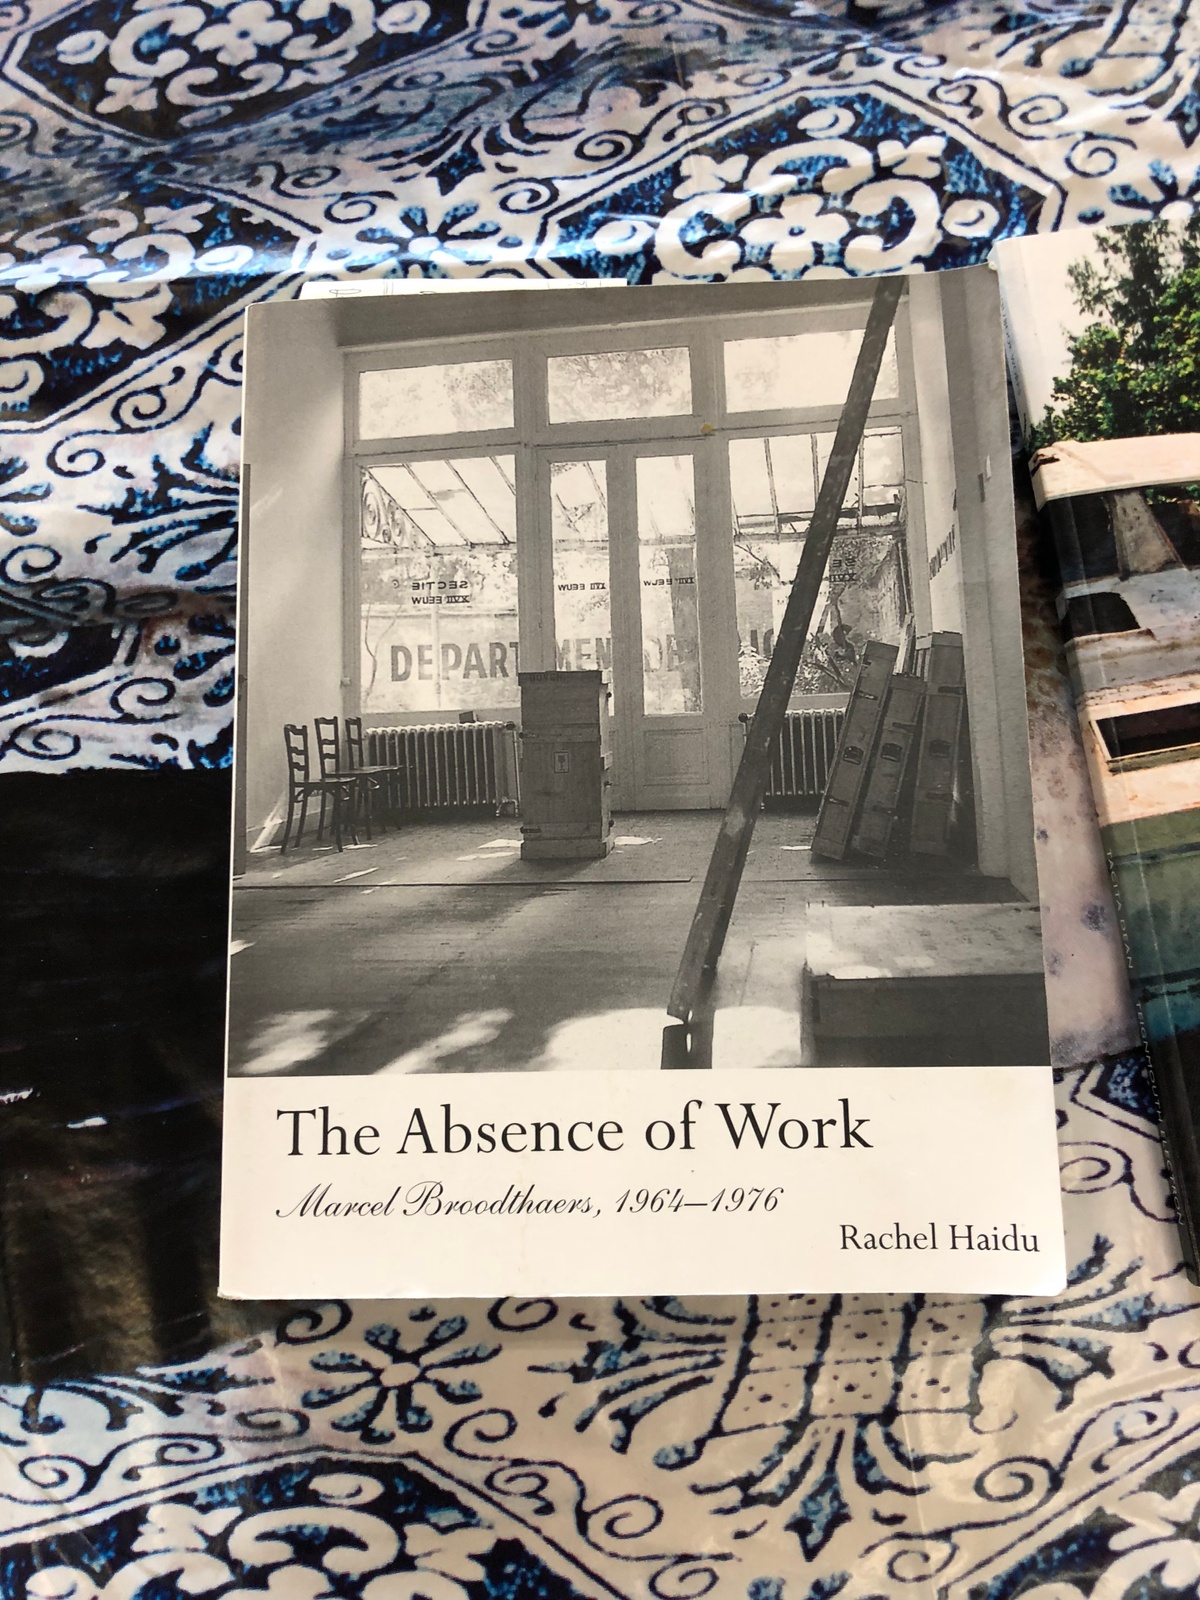 Process photograph from the More For Less exhibition in A4’s Gallery that shows a copy of Rachel Haidu’s book ‘The Absence of Work: Marcel Broodthaers, 1964-1976’.
